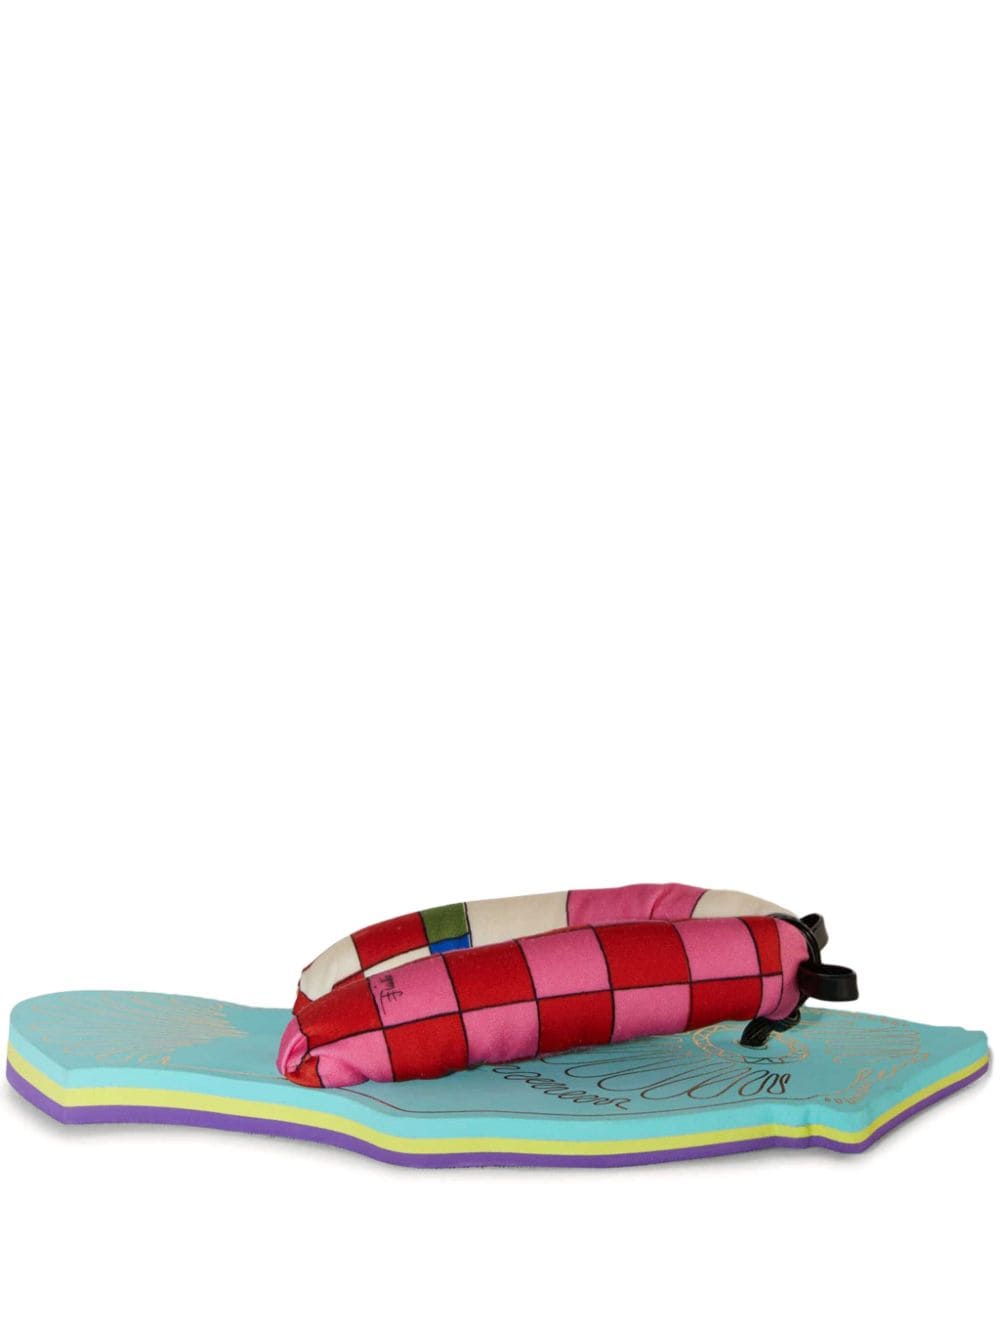 Pucci Scuba Marmo-print Sandals In Pink